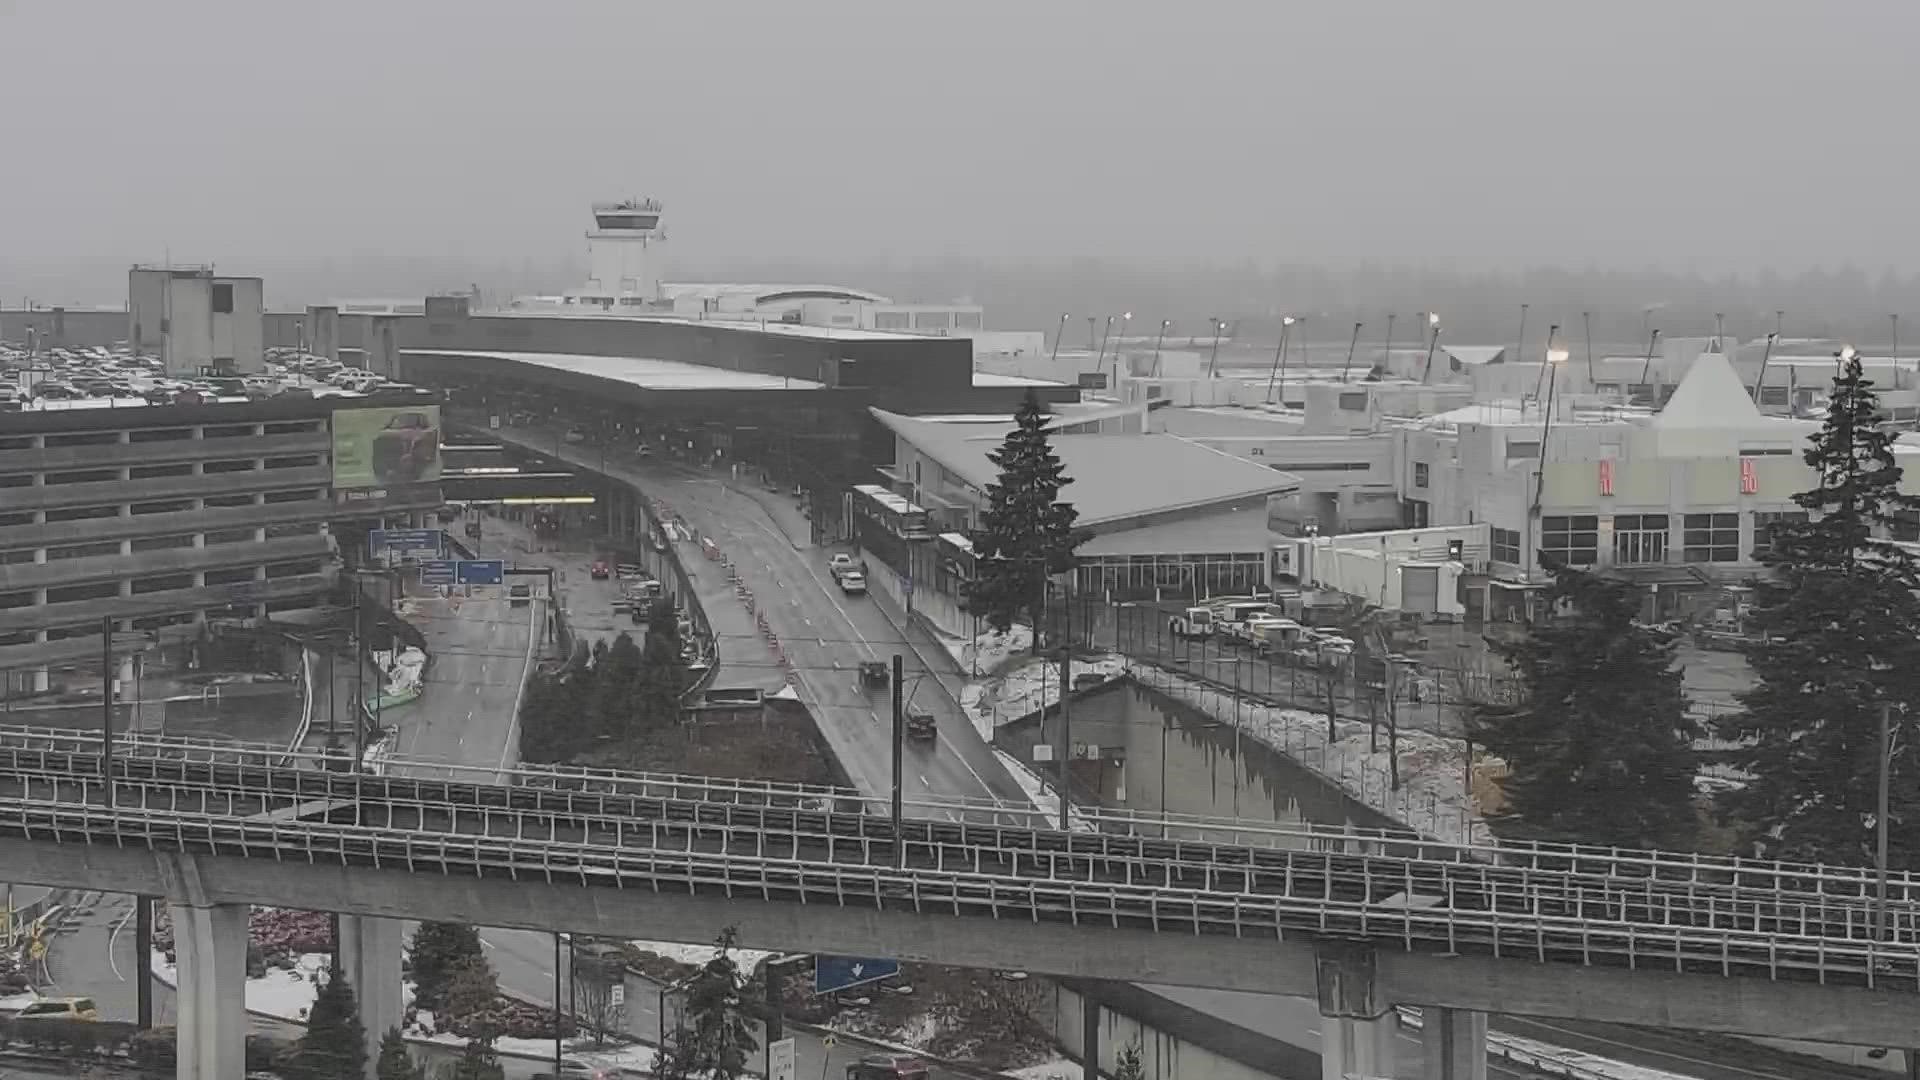 Sea-Tac airport had flight cancellations Tuesday due to snow, Perry Cooper from discusses what travelers should expect for the rest of the week.